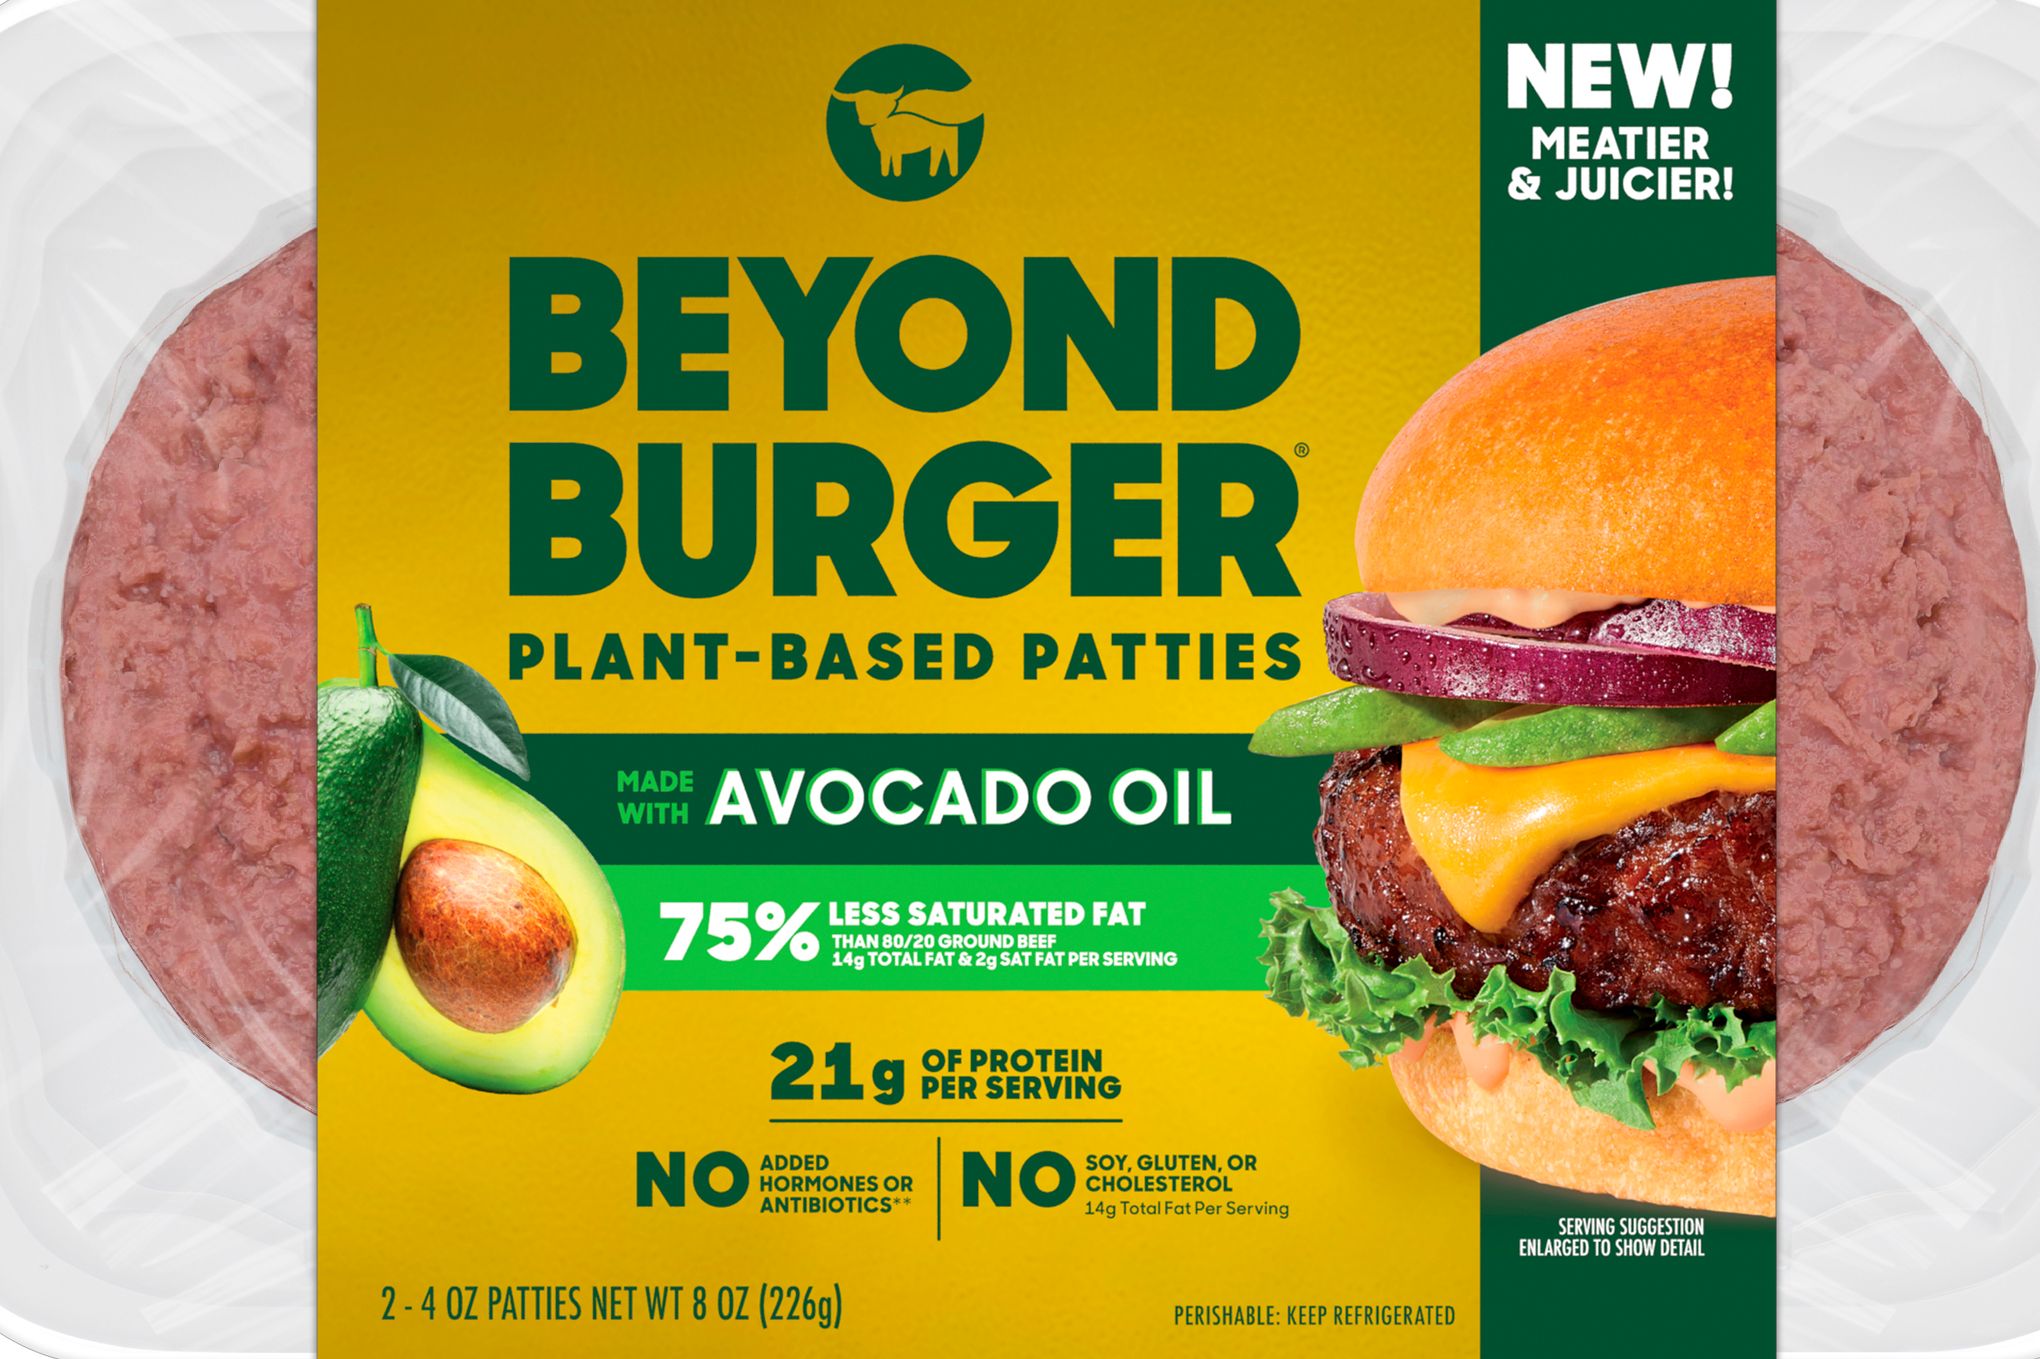 Can a healthier plant-based burger combat falling US sales? Beyond